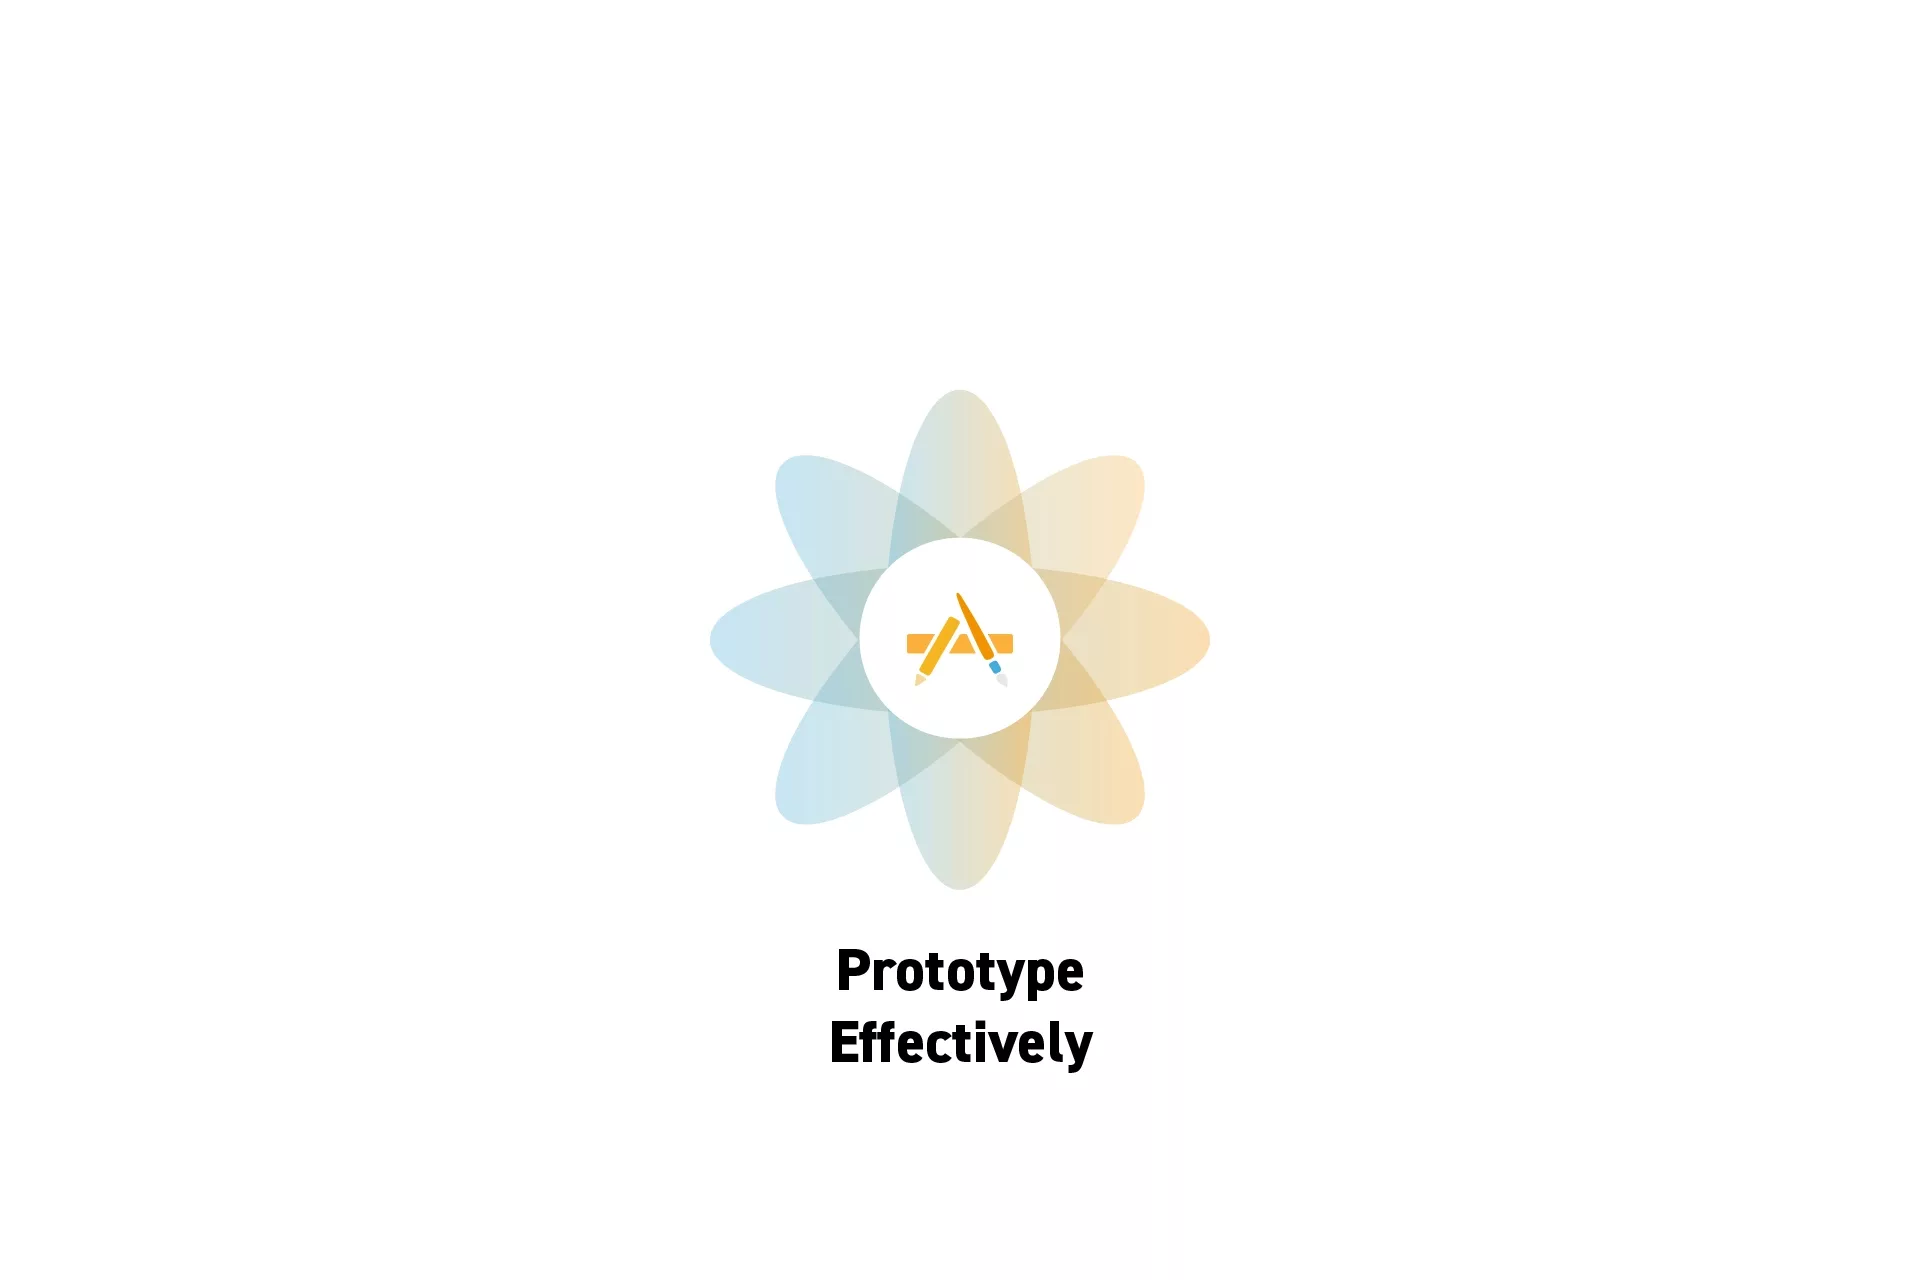 A flower that represents Digital Craft with the text “Prototype Effectively” beneath it.